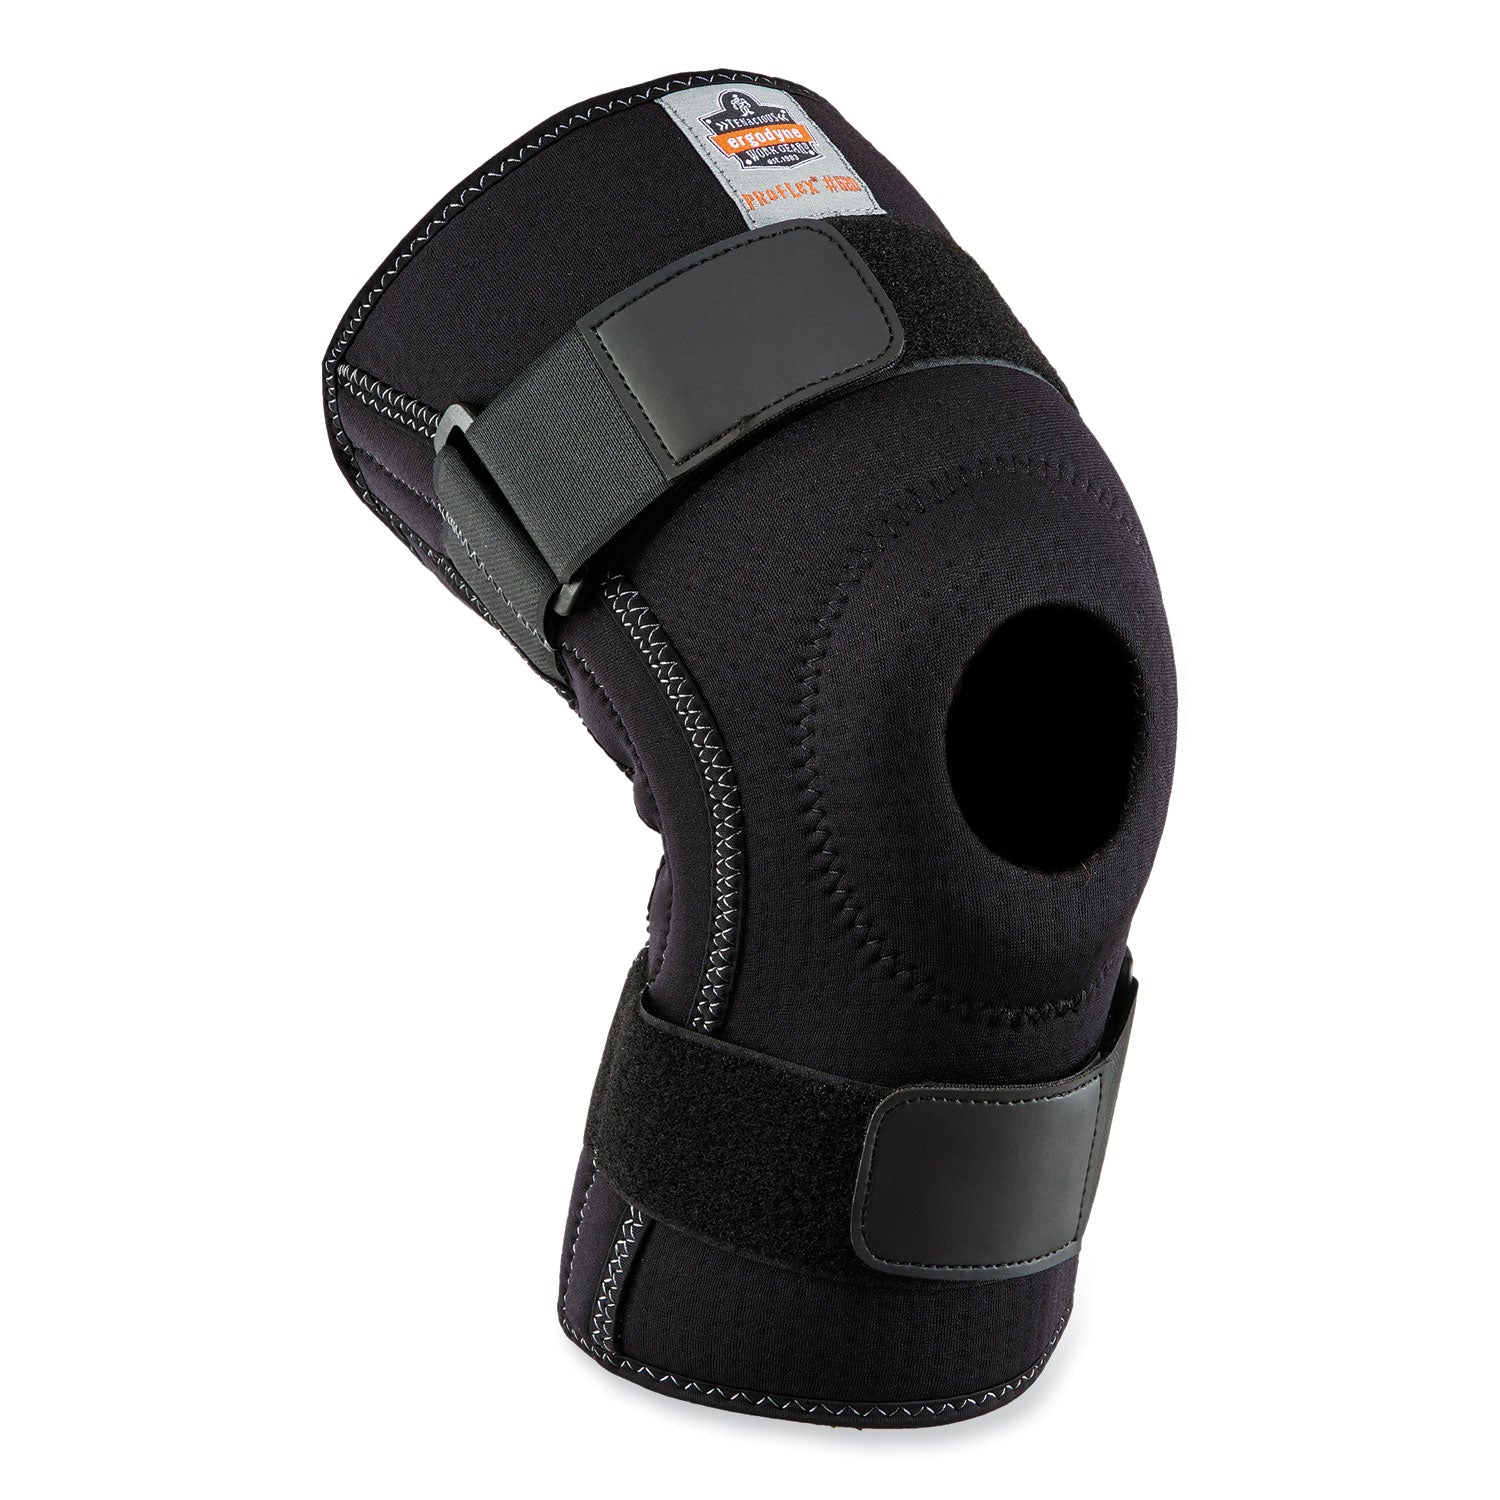 proflex-620-open-patella-spiral-stays-knee-sleeve-small-black-ships-in-1-3-business-days_ego16542 - 1